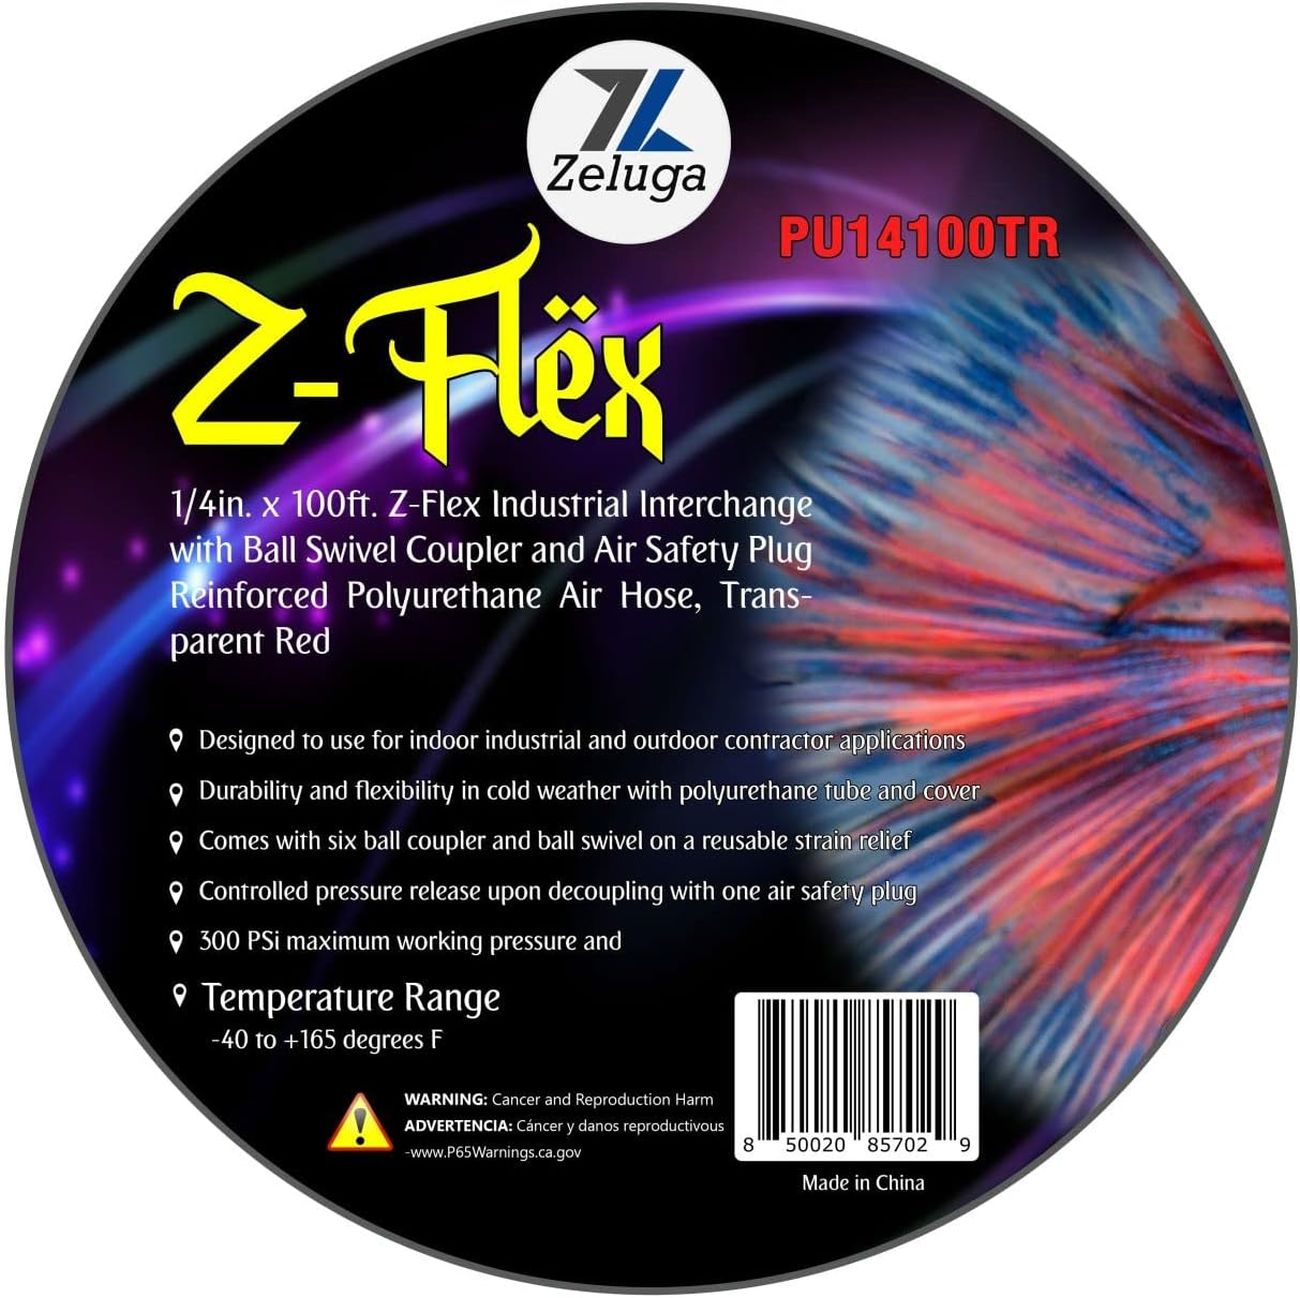 21-305 1/4in. x 100ft. Z-Flex Industrial Interchange with Ball Swivel Coupler and Air Safety Plug Reinforced Polyurethane Air Hose 300 PSI, Transparent Red